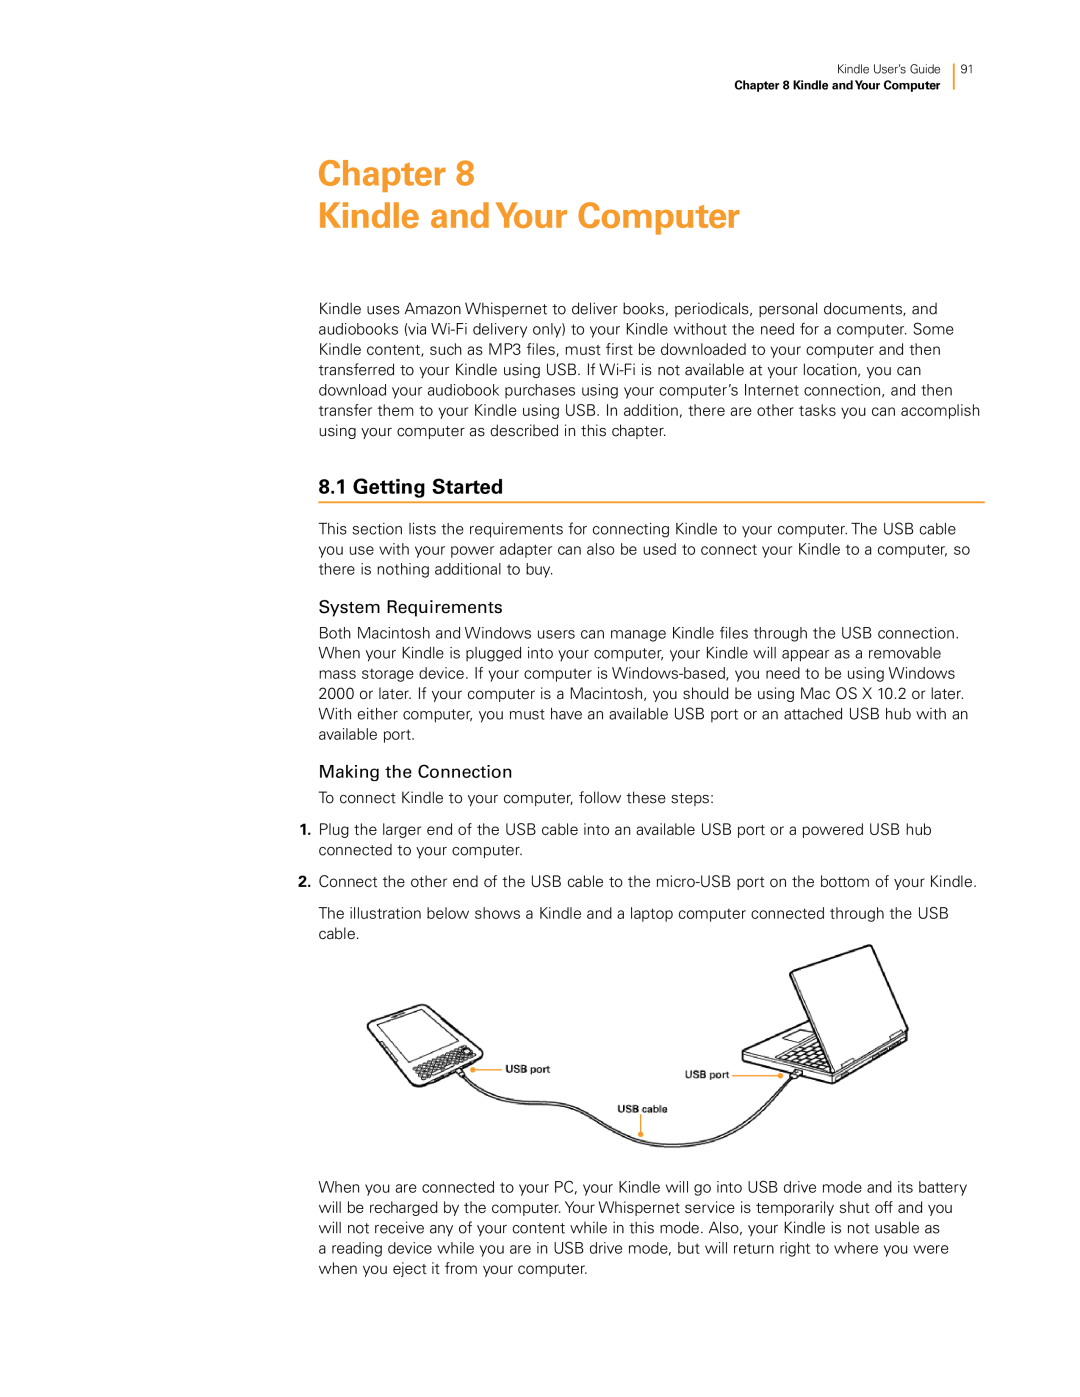 Amazon KNDKYBRD3G manual Chapter Kindle and Your Computer, Getting Started, System Requirements, Making the Connection 